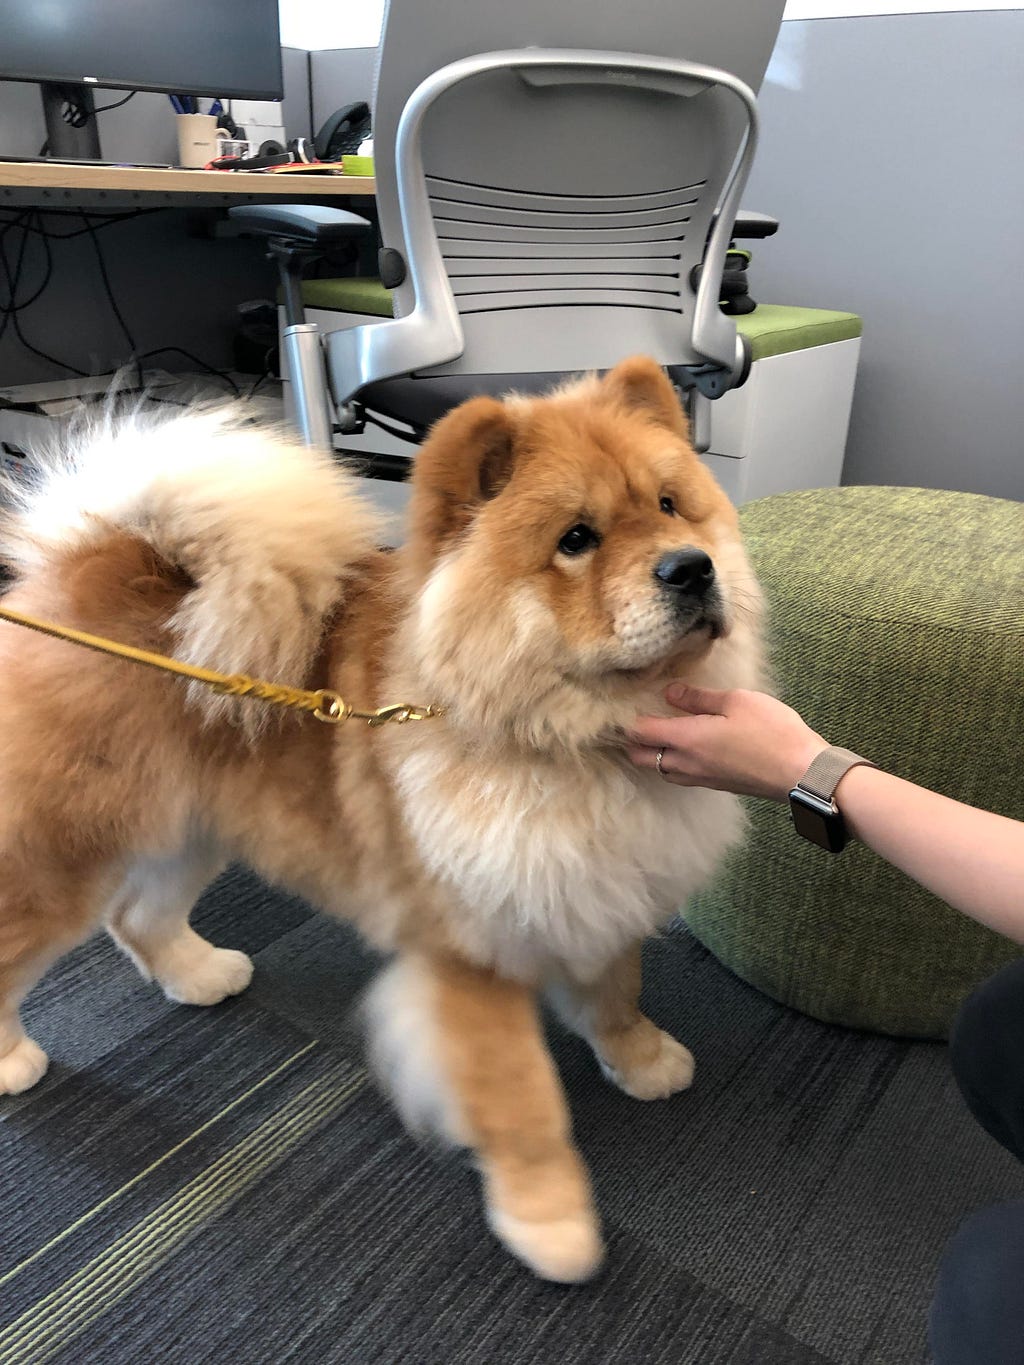 Chow chow (dog) at VMware